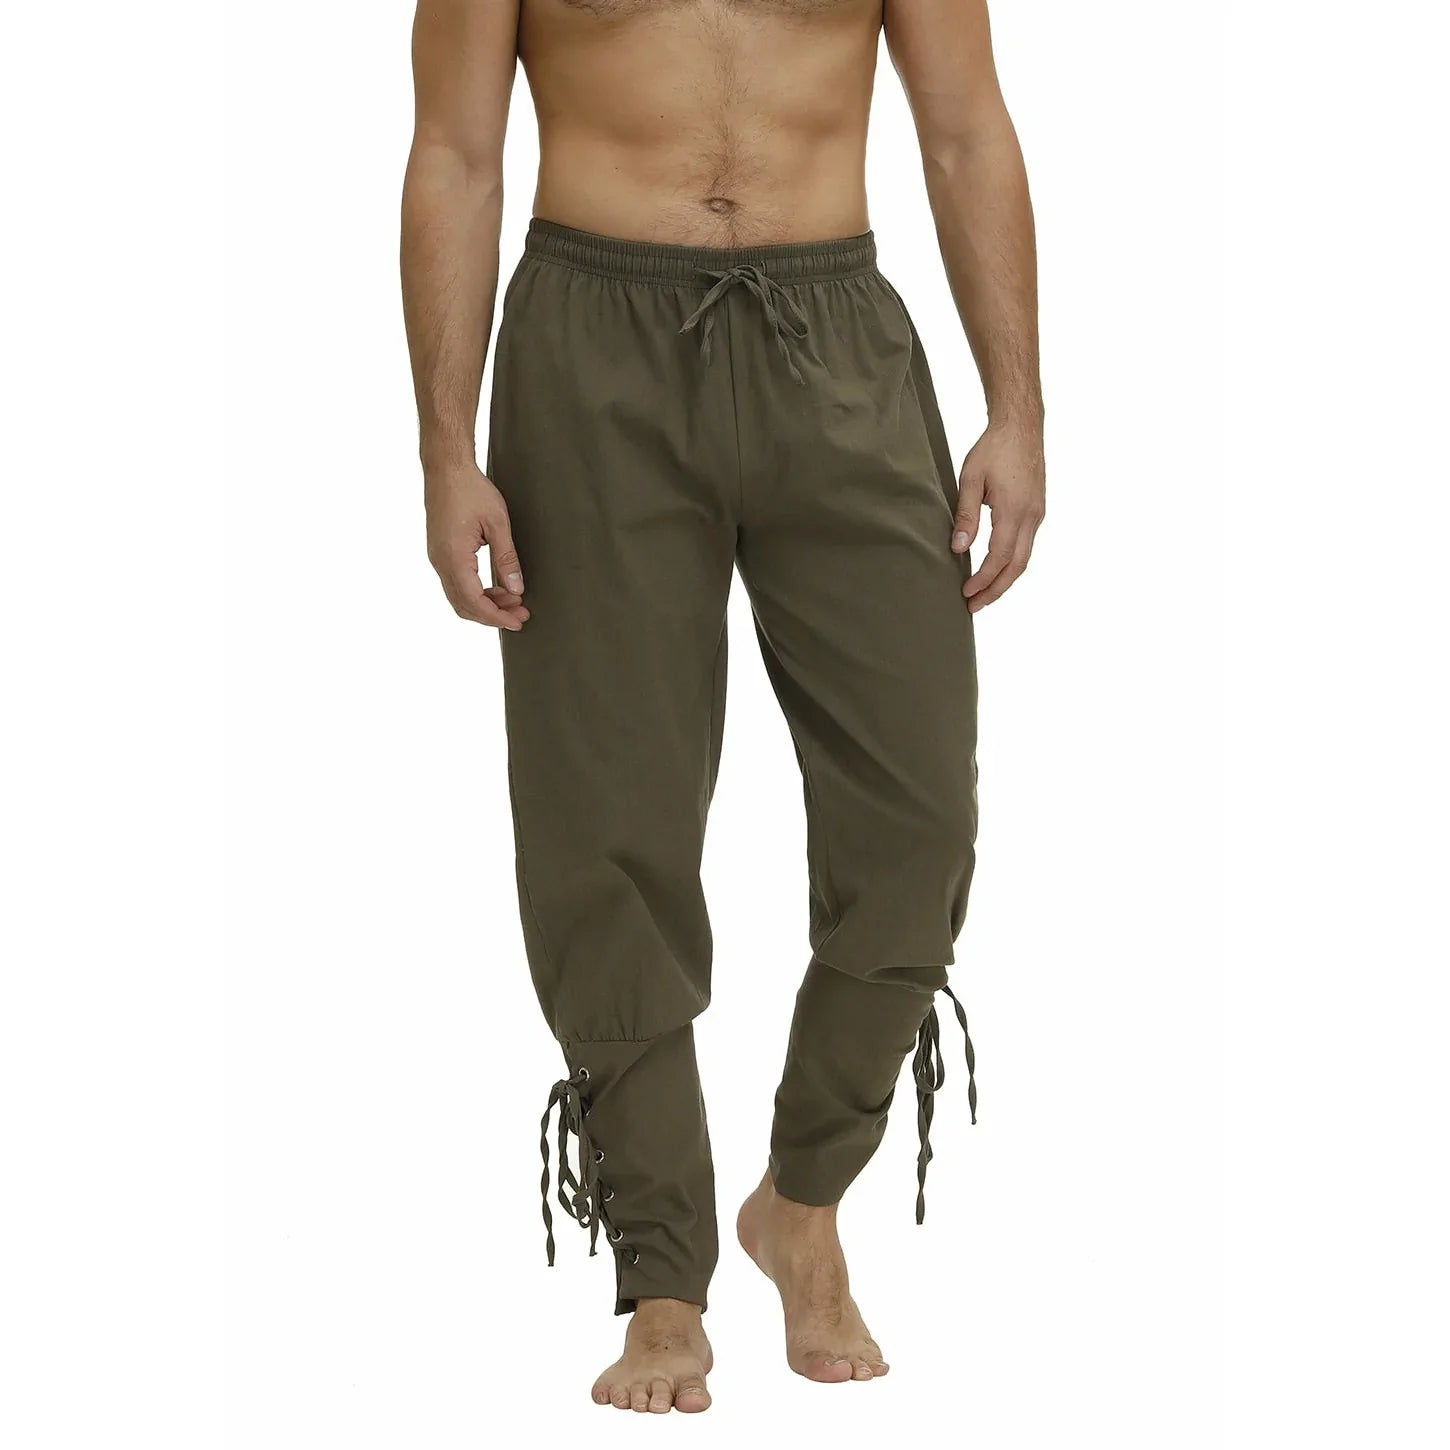 Medieval Pants Costume for Men Women Pirate Trousers Lace Up